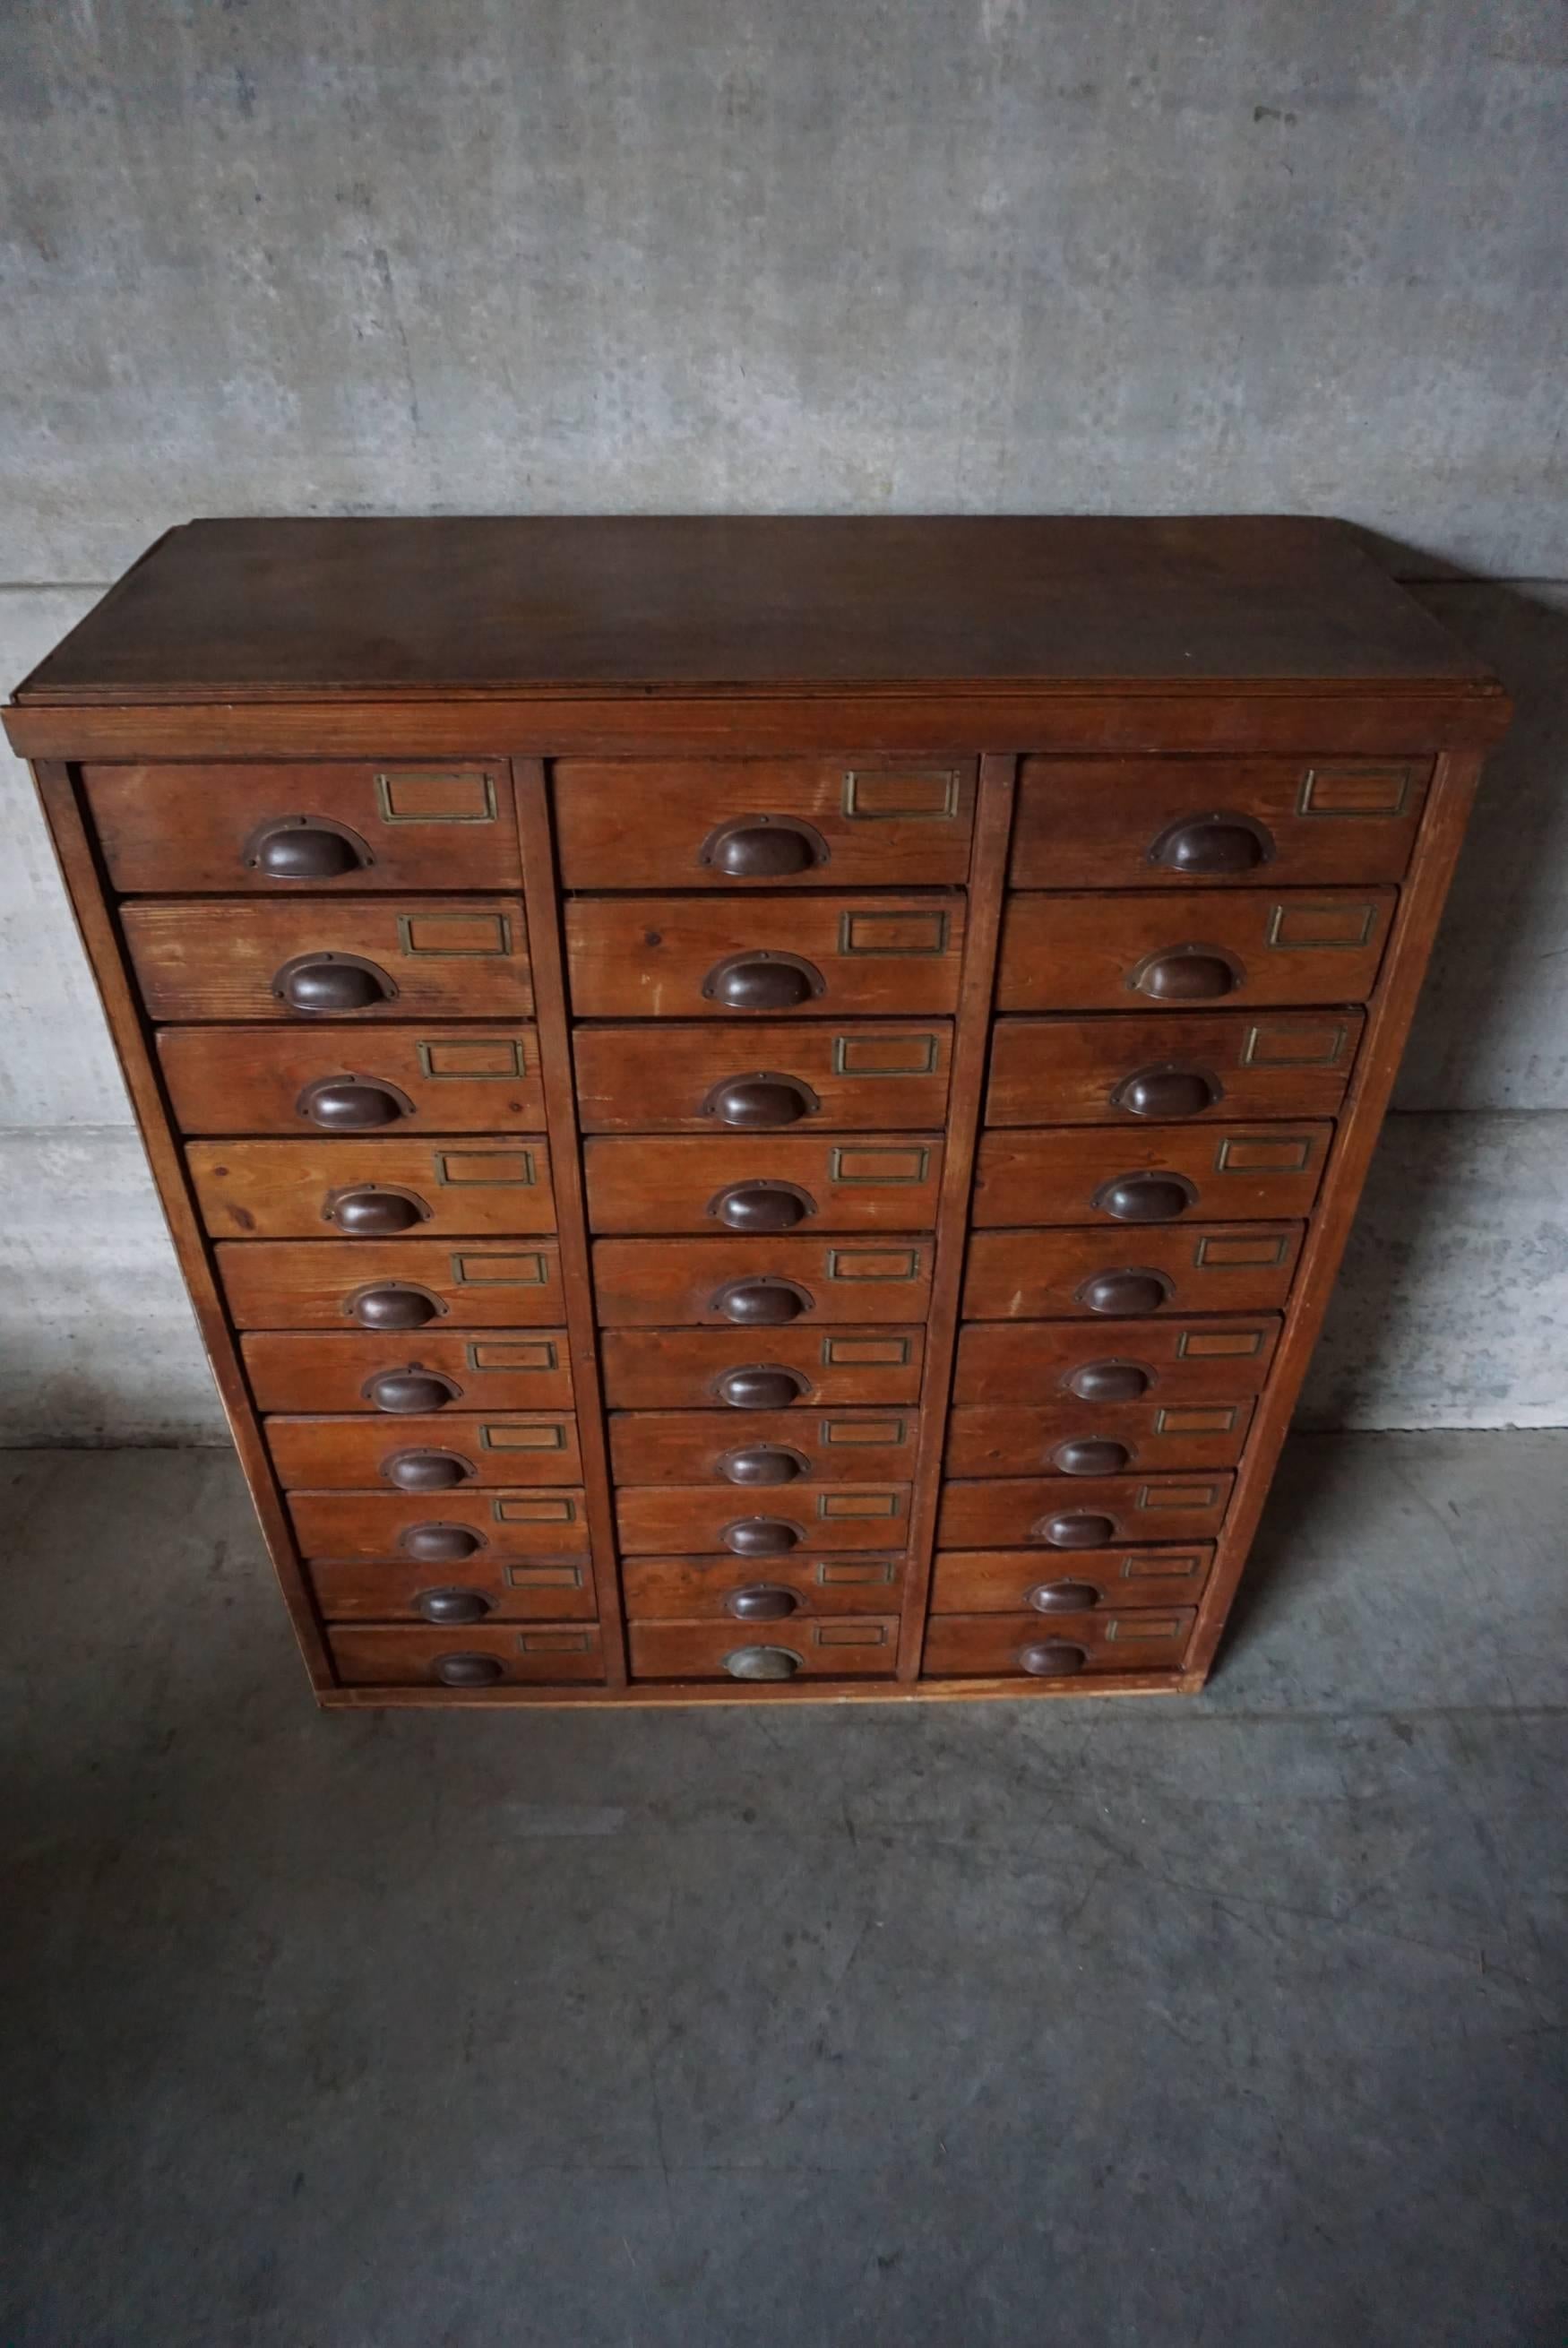 This apothecary bank of drawers was designed and made around the 1930s. The piece is made from pine with cup handles.